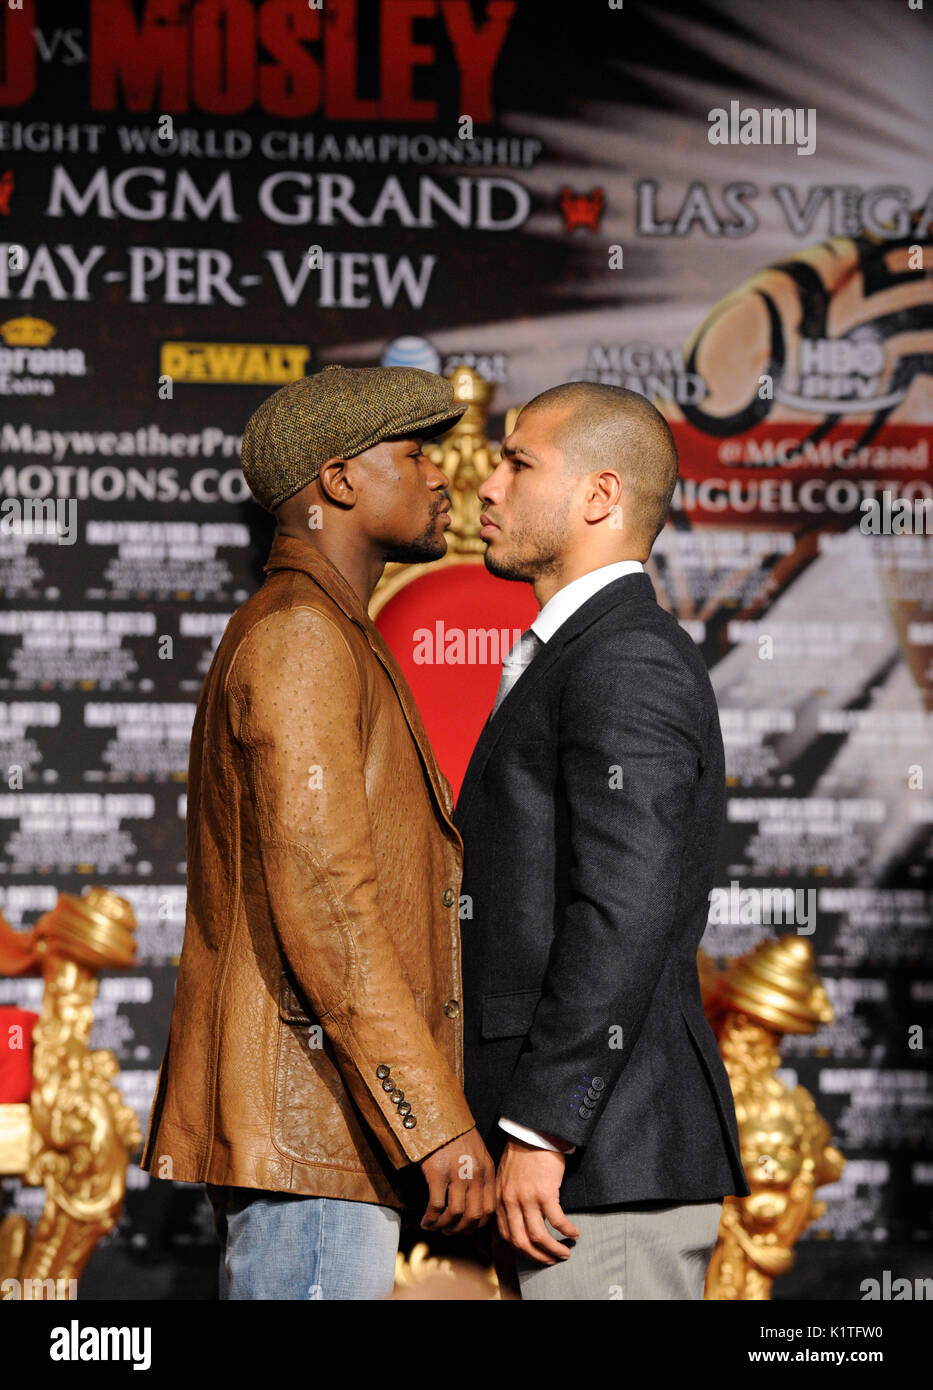 US boxer Floyd Mayweather (L) WBA Super Welterweight World Champion Miguel Cotto Puerto Rico faceoff during press conference Grauman's Chinese Theatre Hollywood March 1,2012. Mayweather Cotto will meet WBA Super Welterweight World Championship fight May 5 MGM Grand Las Vegas. Stock Photo